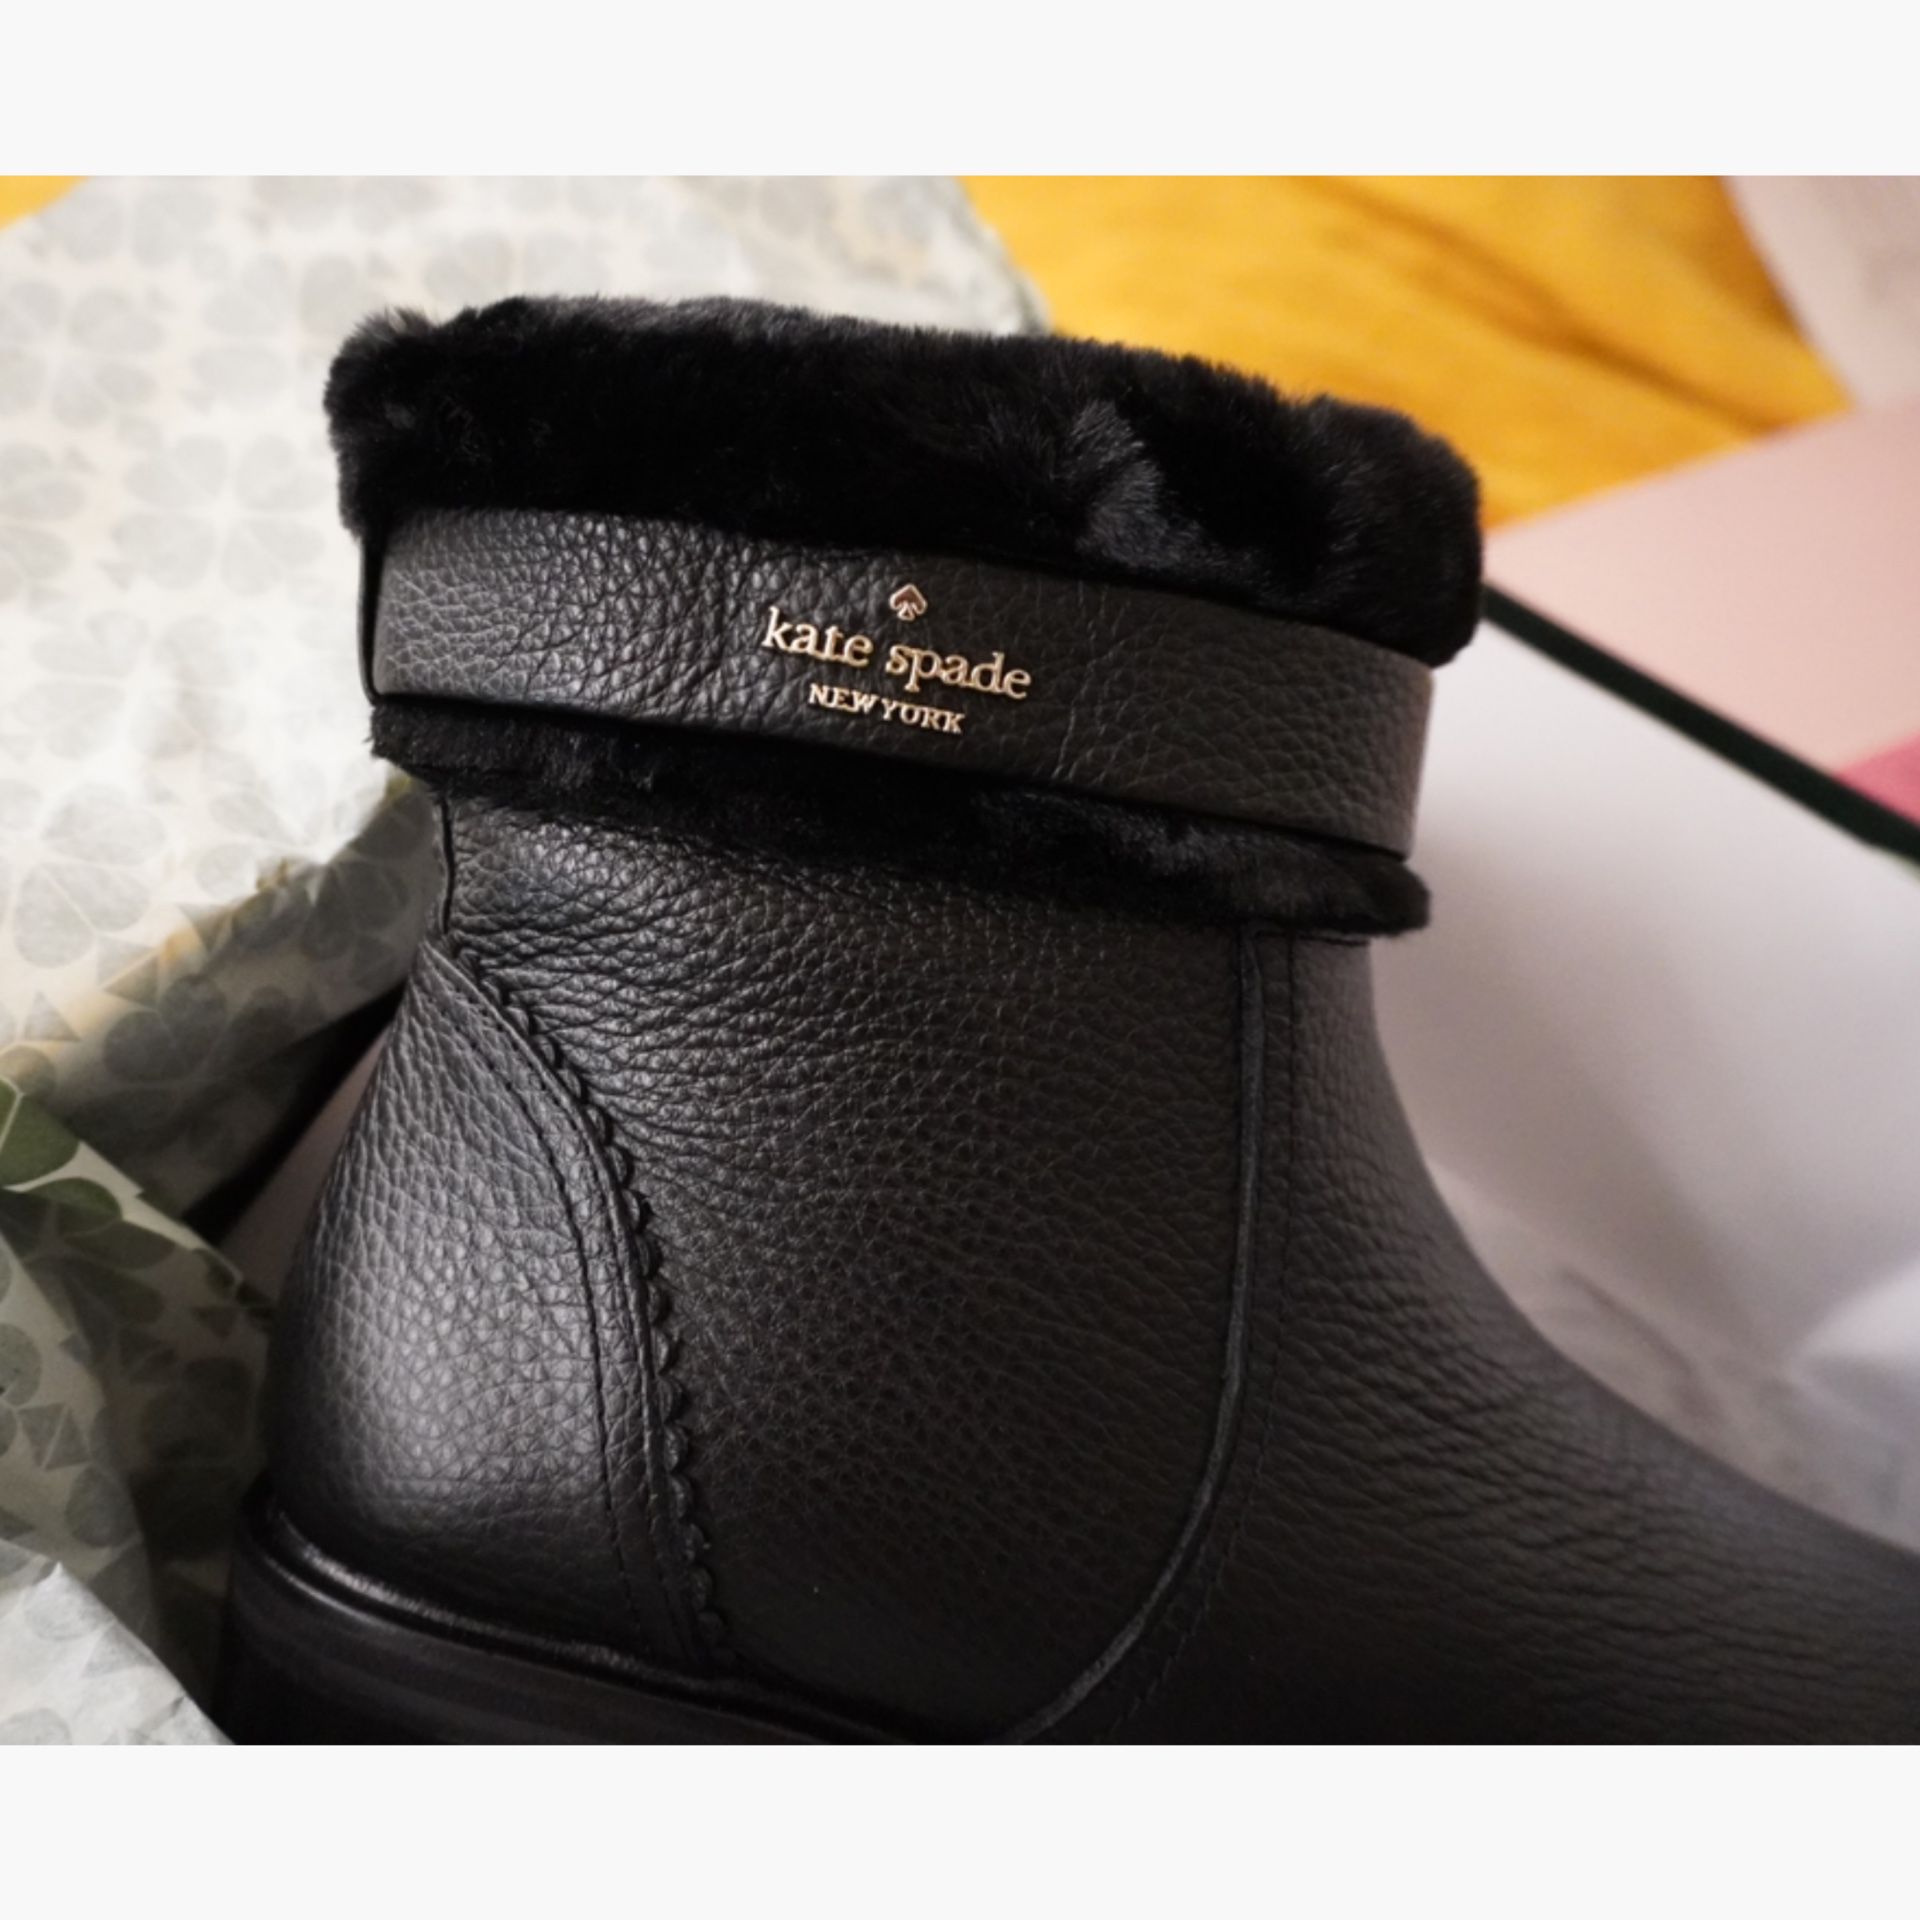 Kate Spade Boots Size 9.5 